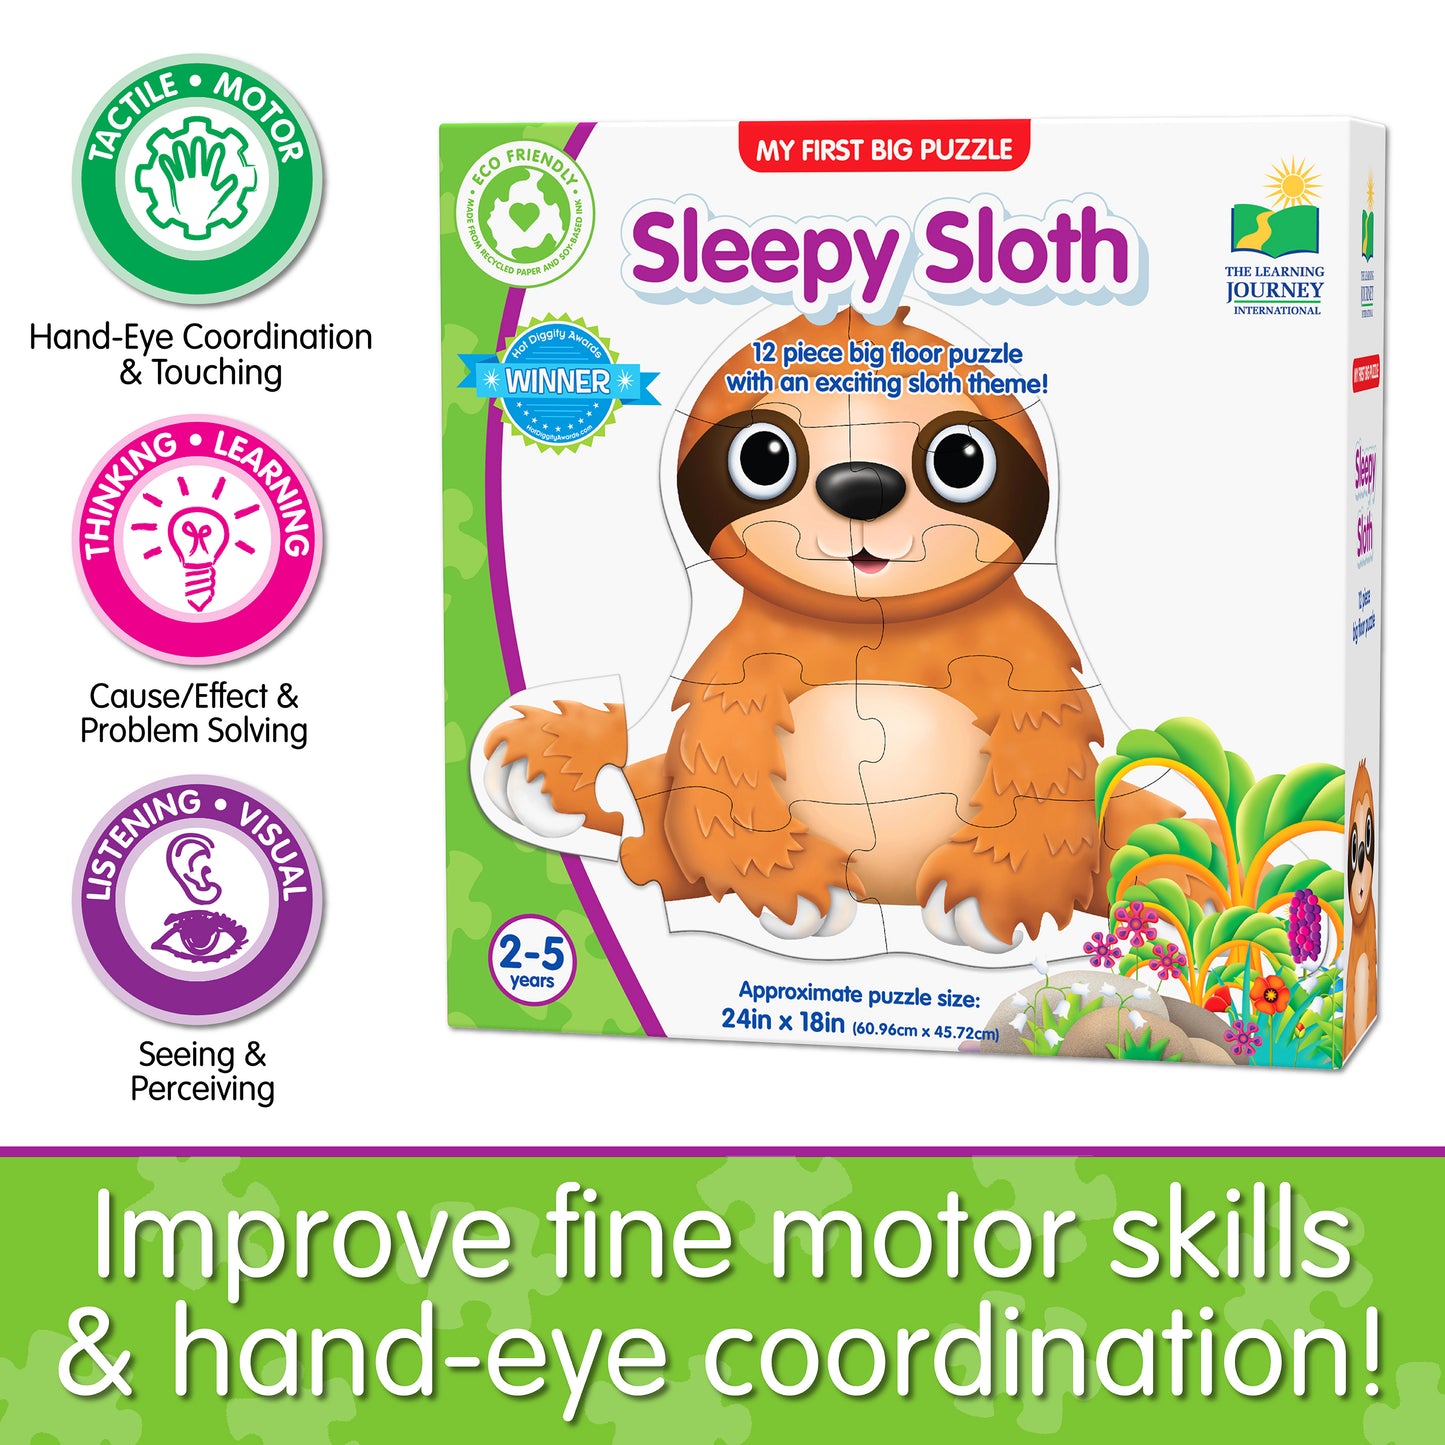 Infographic about My First Big Puzzle - Sleepy Sloth's educational benefits that says, "Improve fine motor skills and hand-eye coordination!"